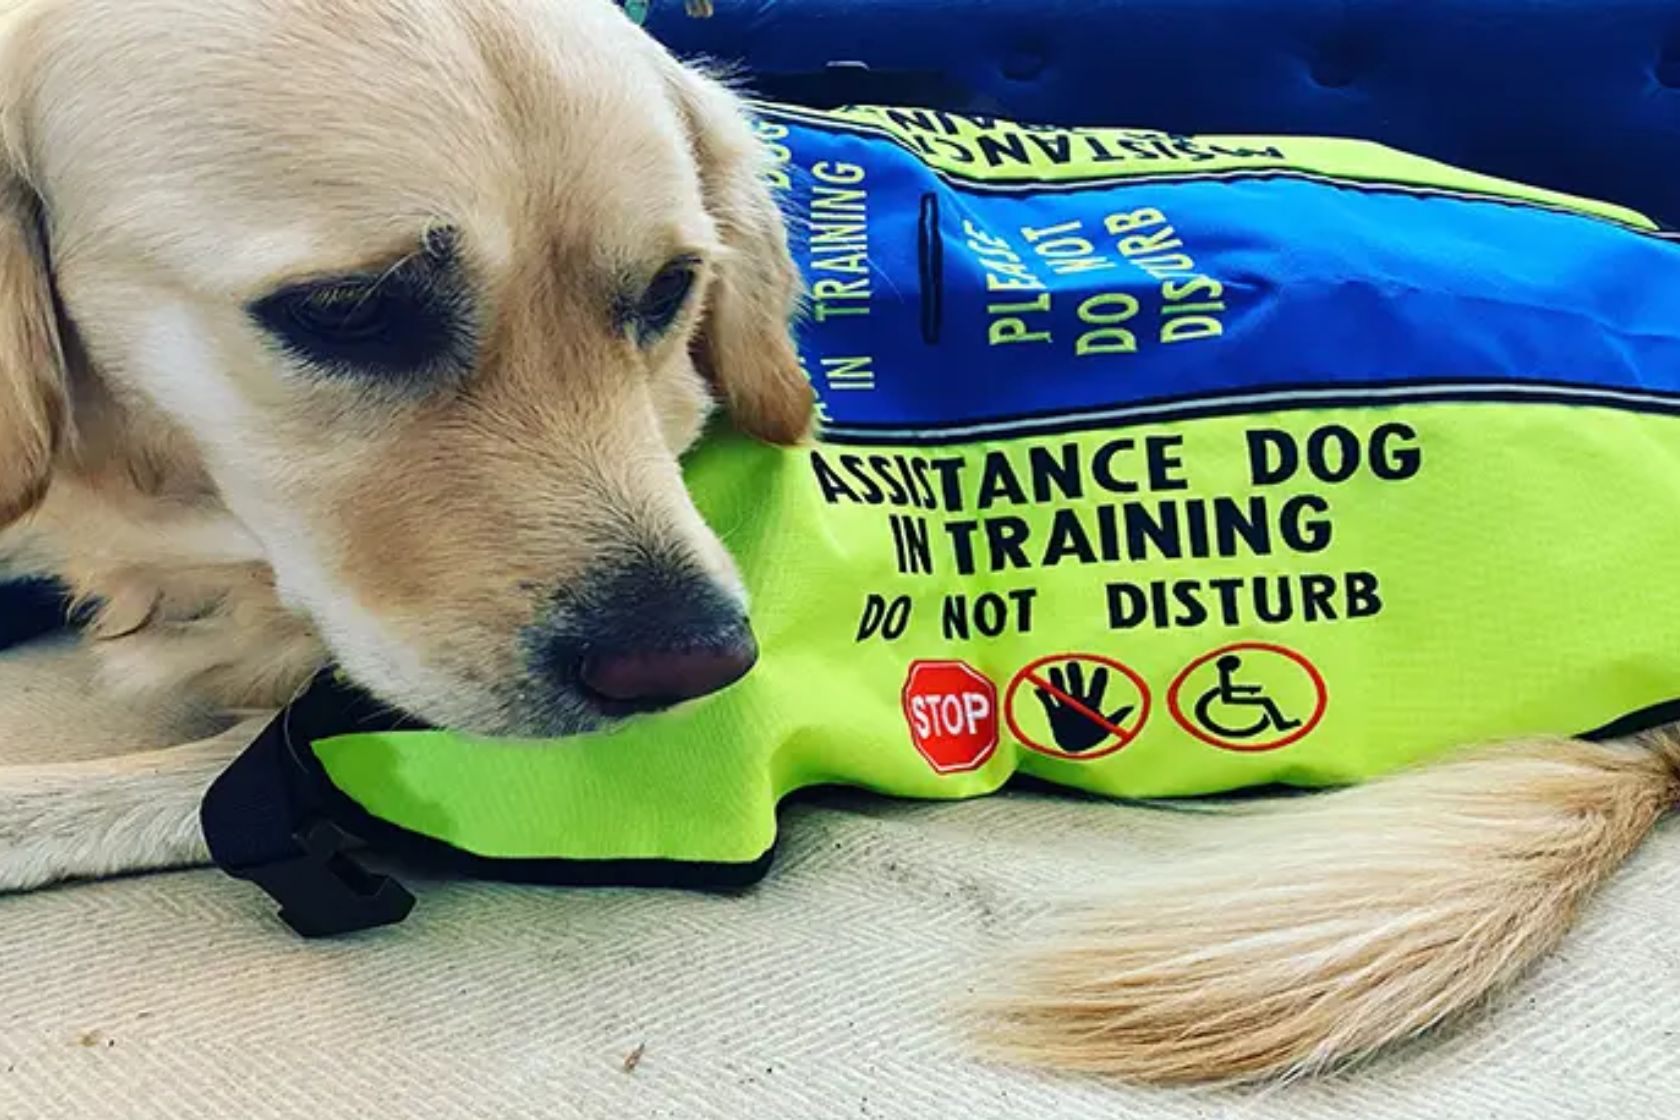 Golden retriever in an assistant dog in training vest sitting on the floor